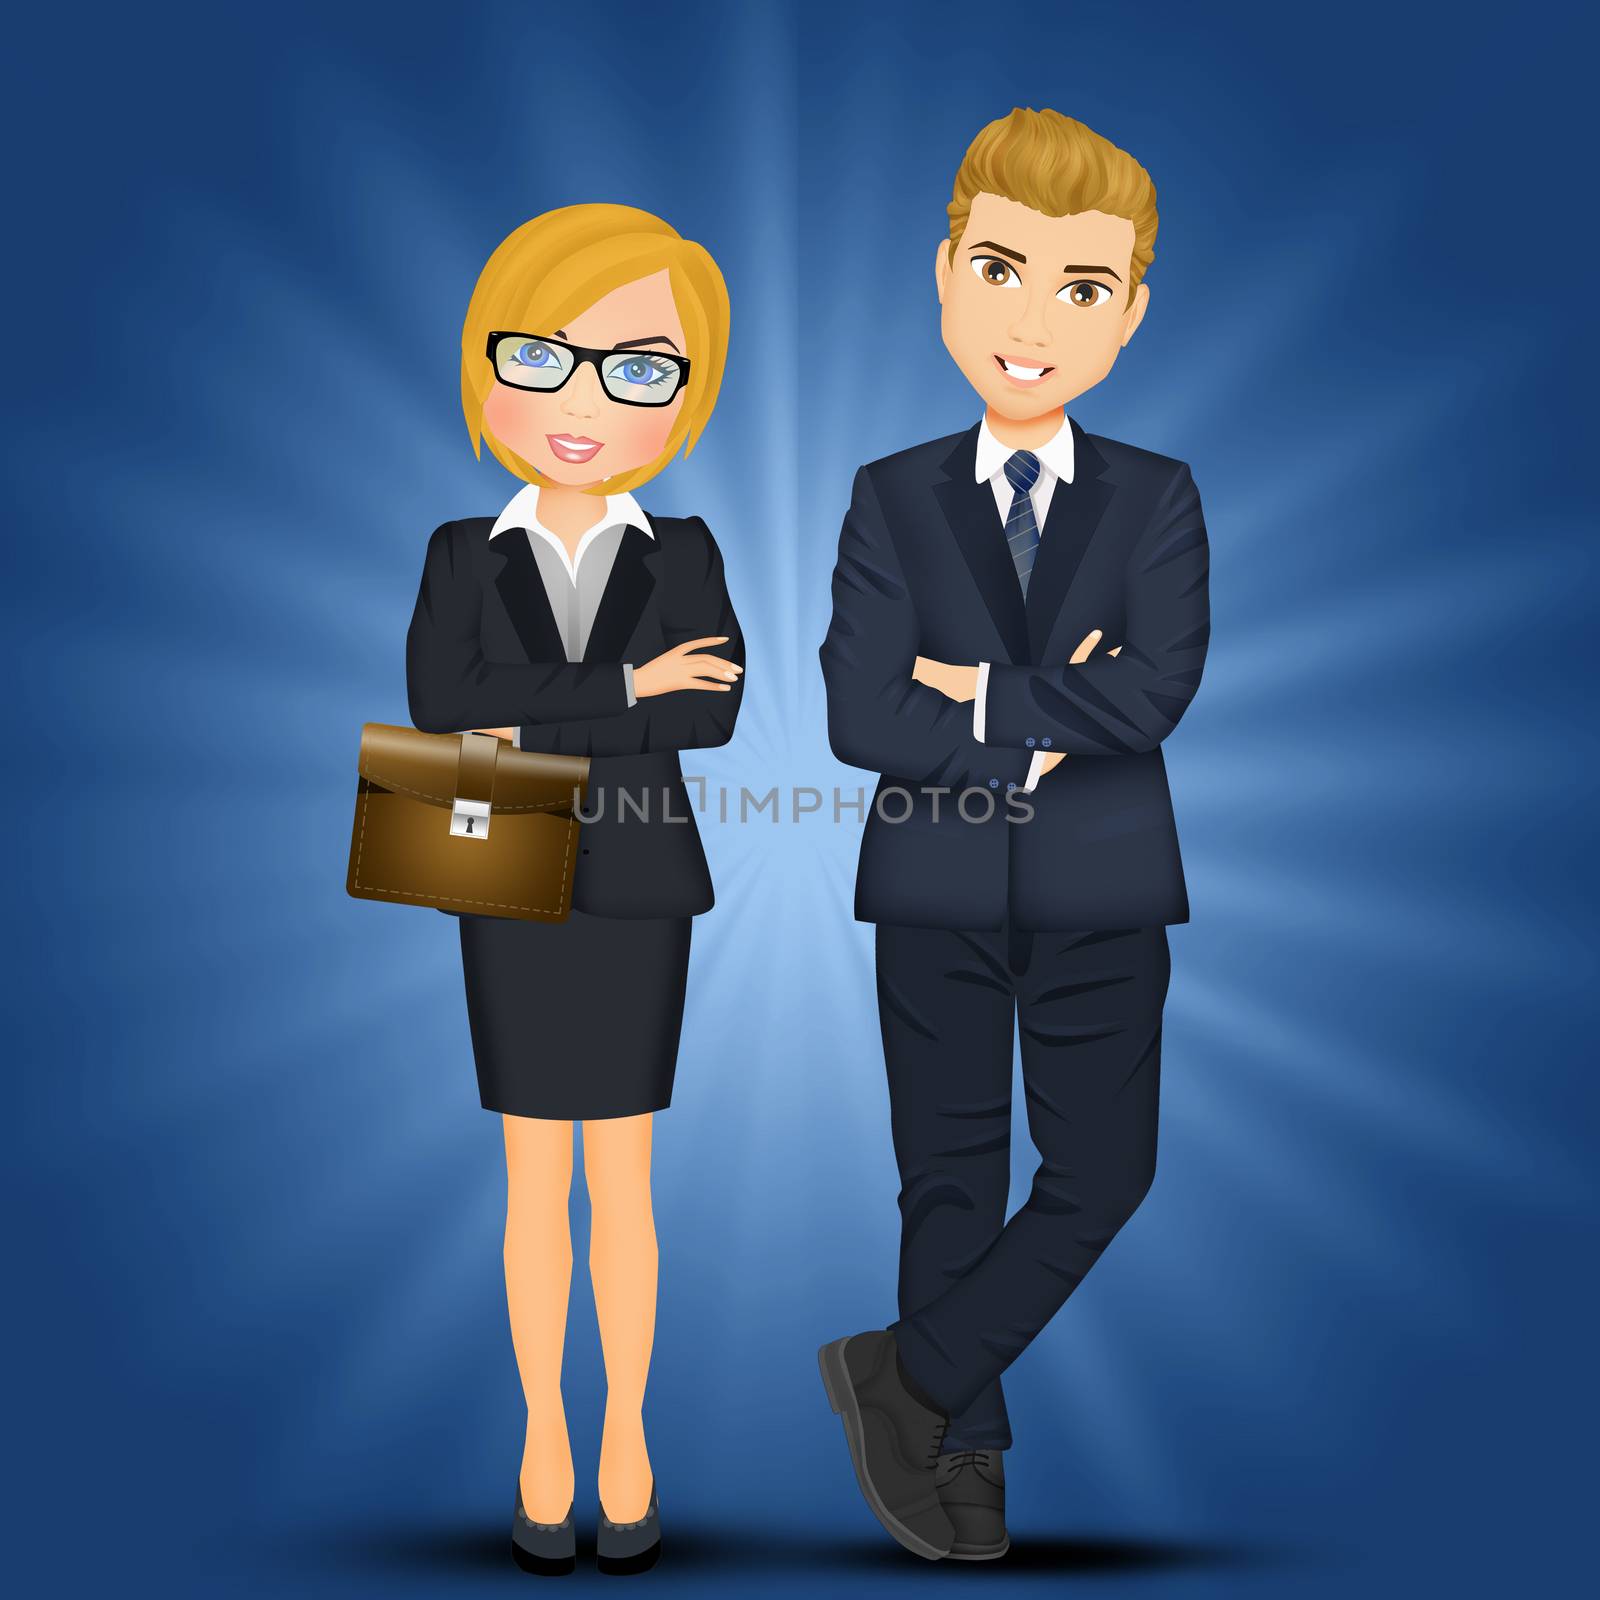 illustration of woman and man who are successful in business